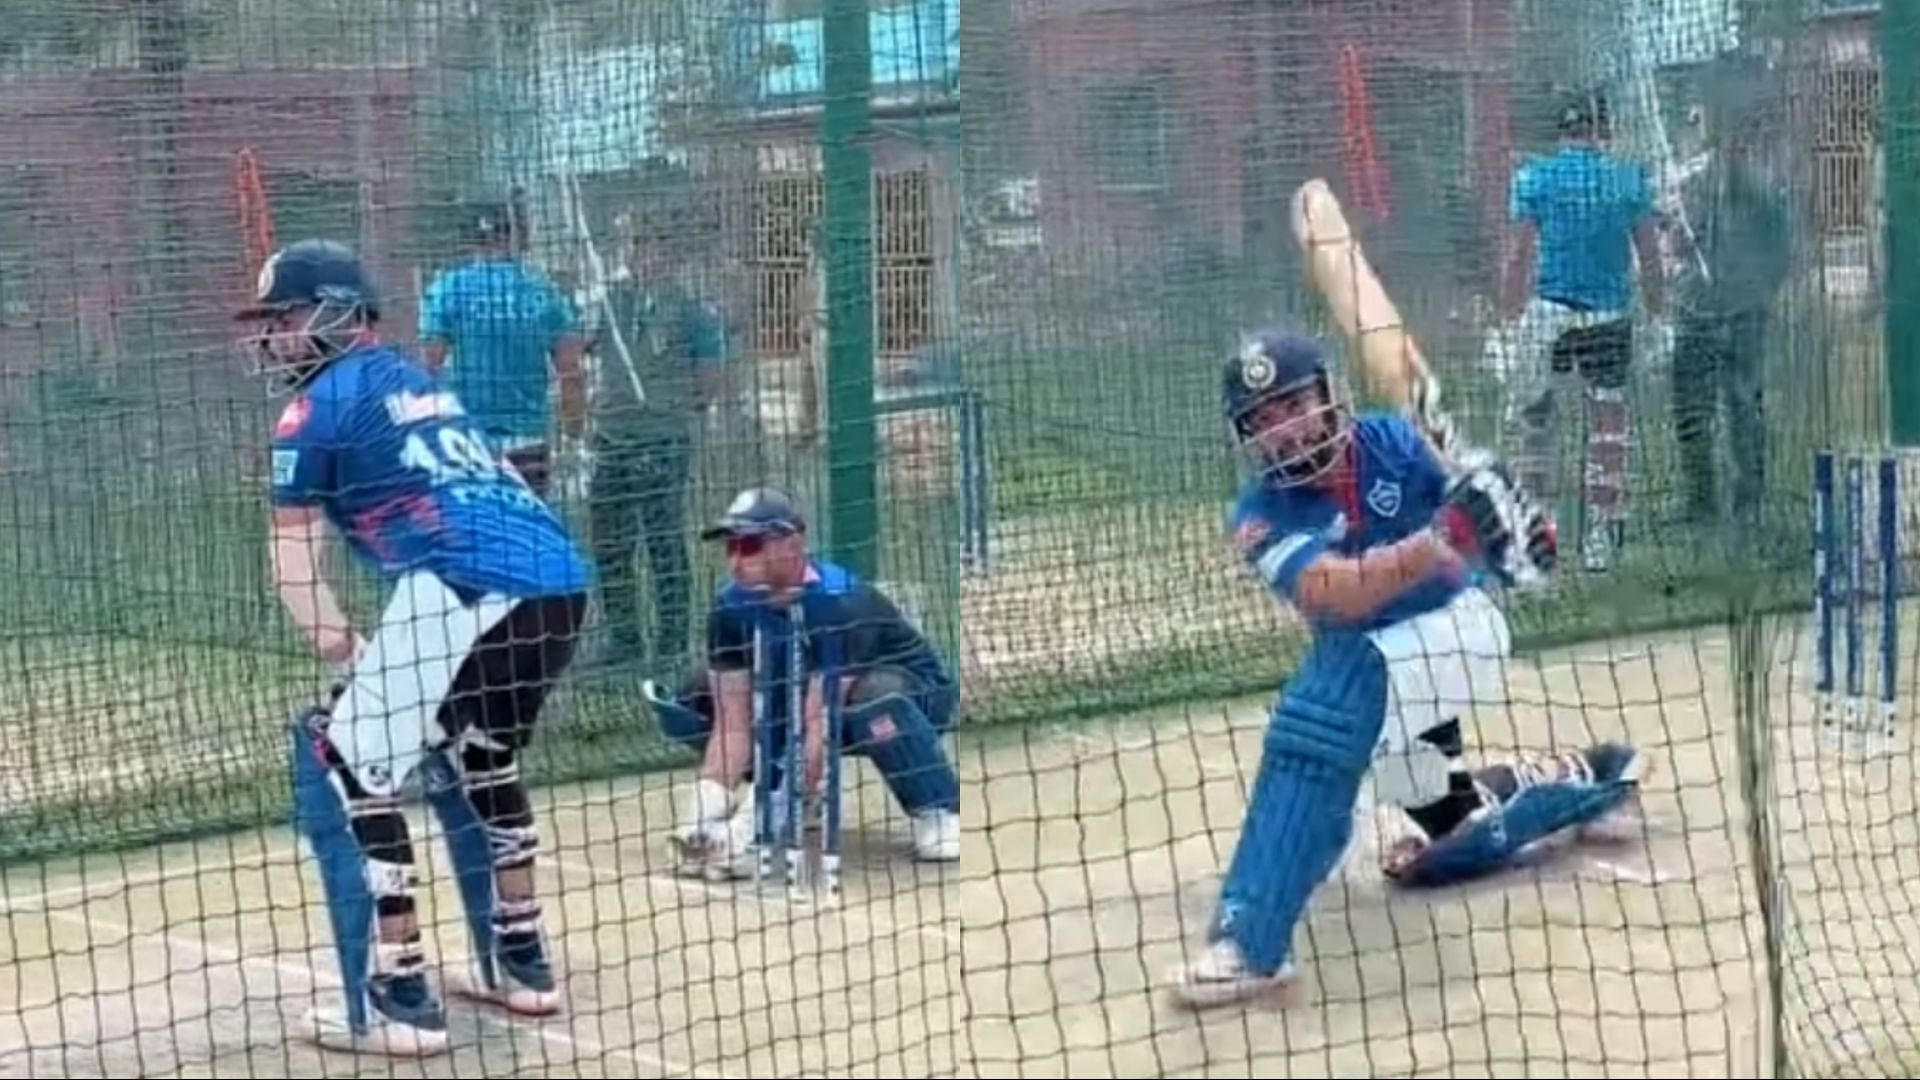 Prithvi Shaw looks in great touch ahead of IPL 2023 (Image: Delhi Capitals)